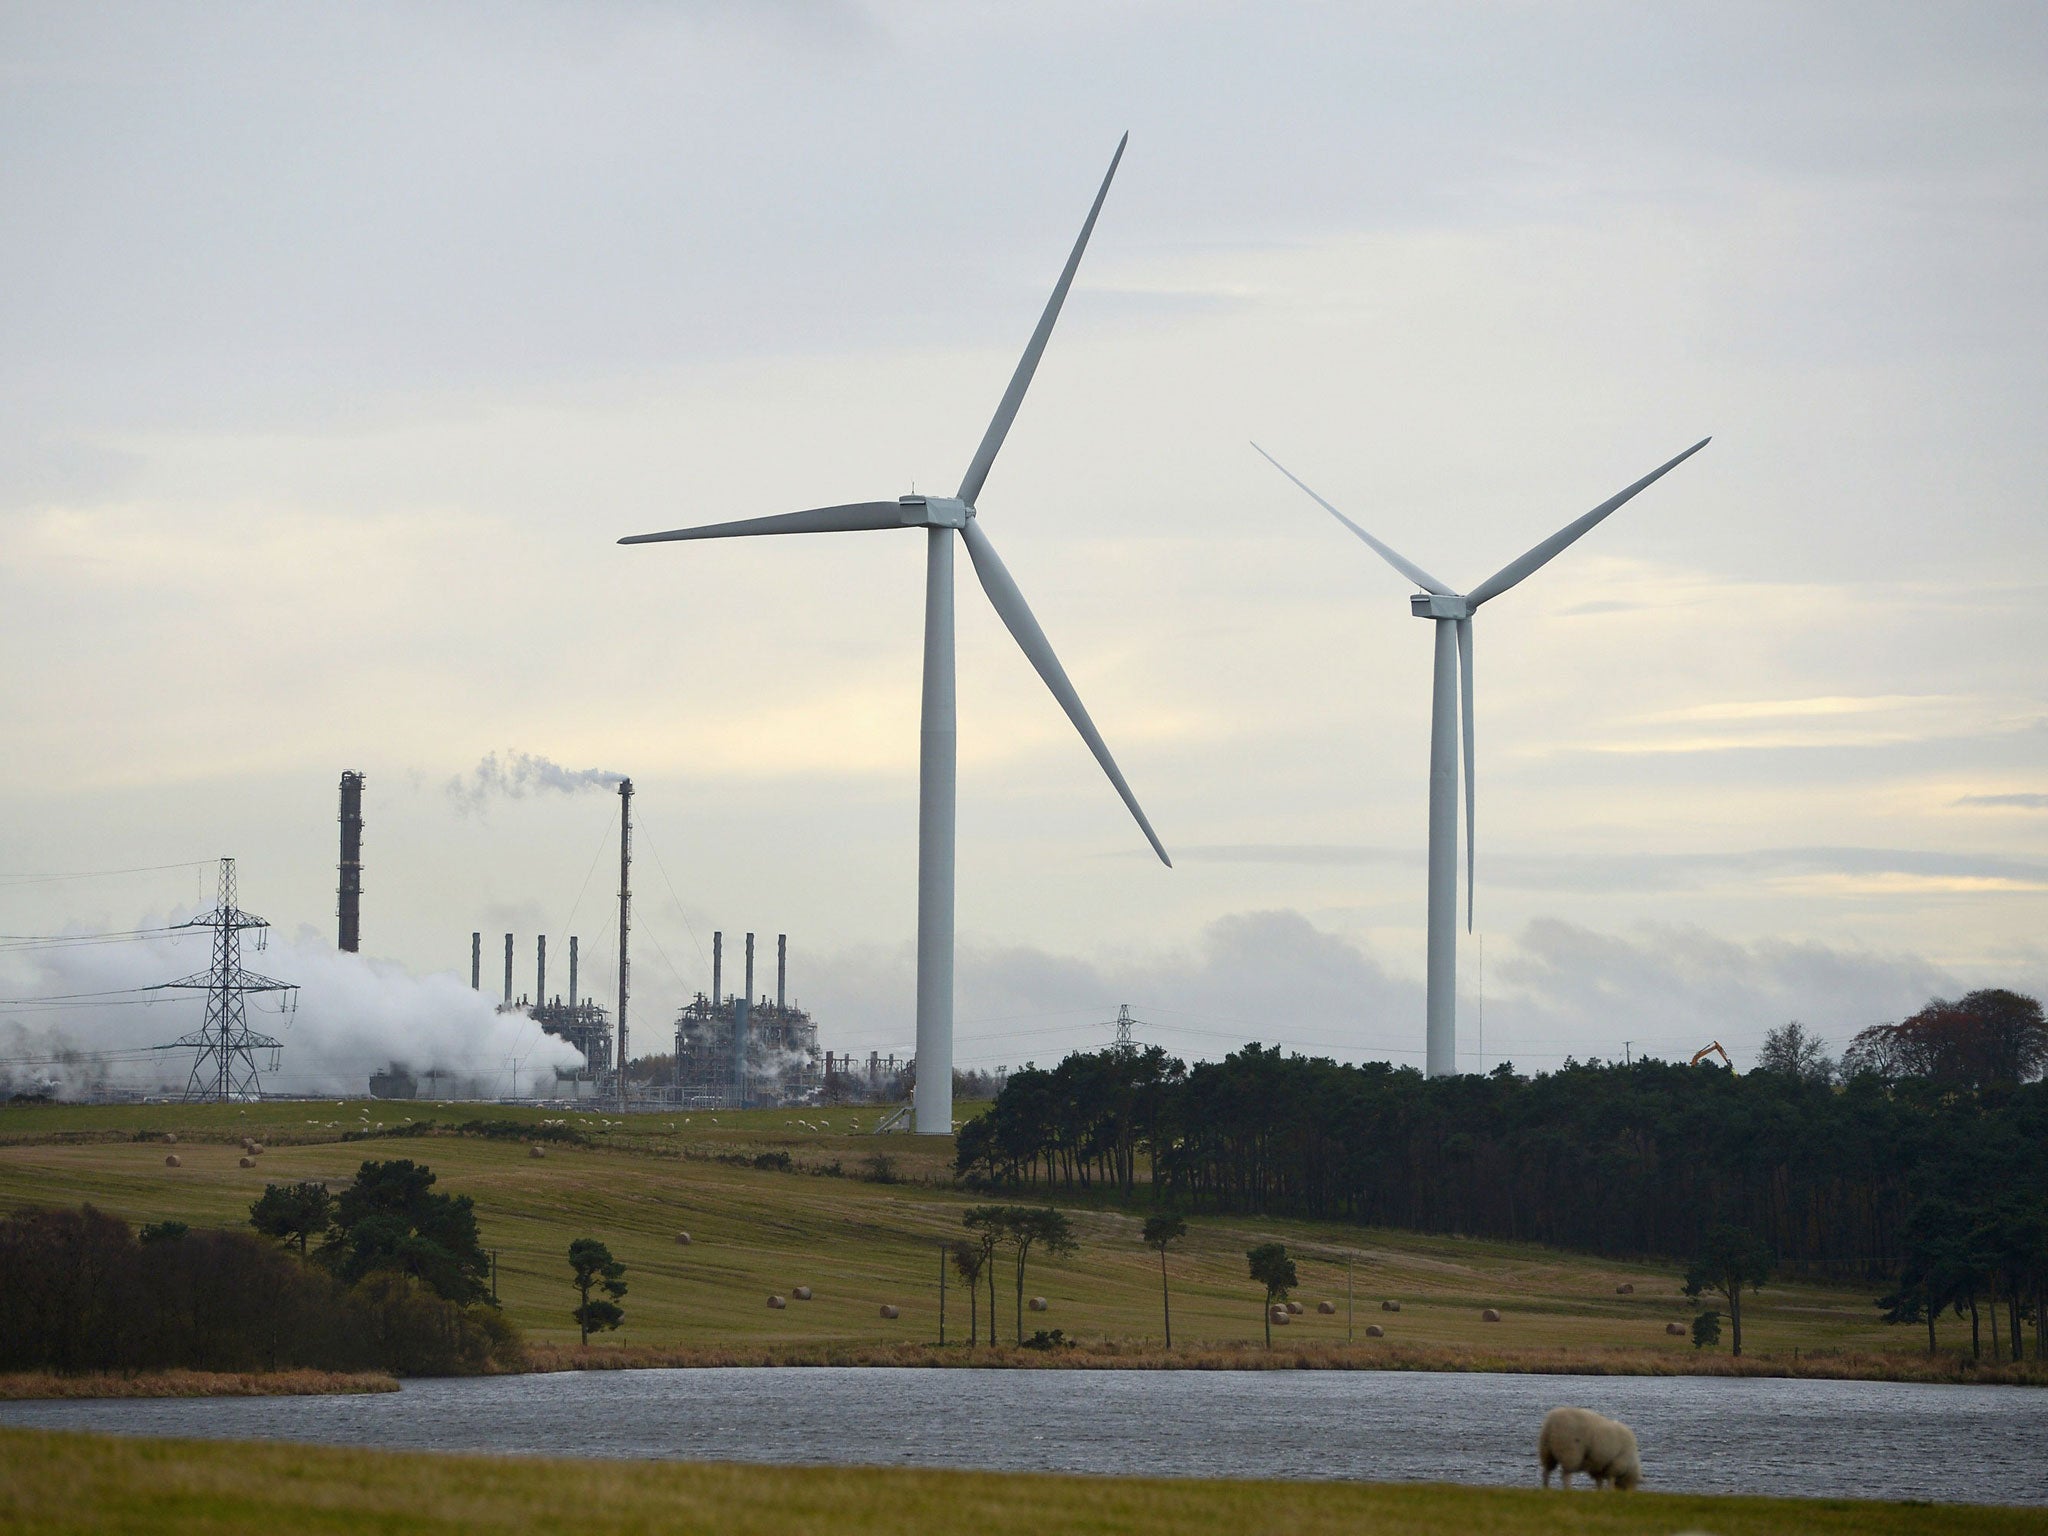 The cost of funding renewable energy schemes is being passed on to even the poorest households